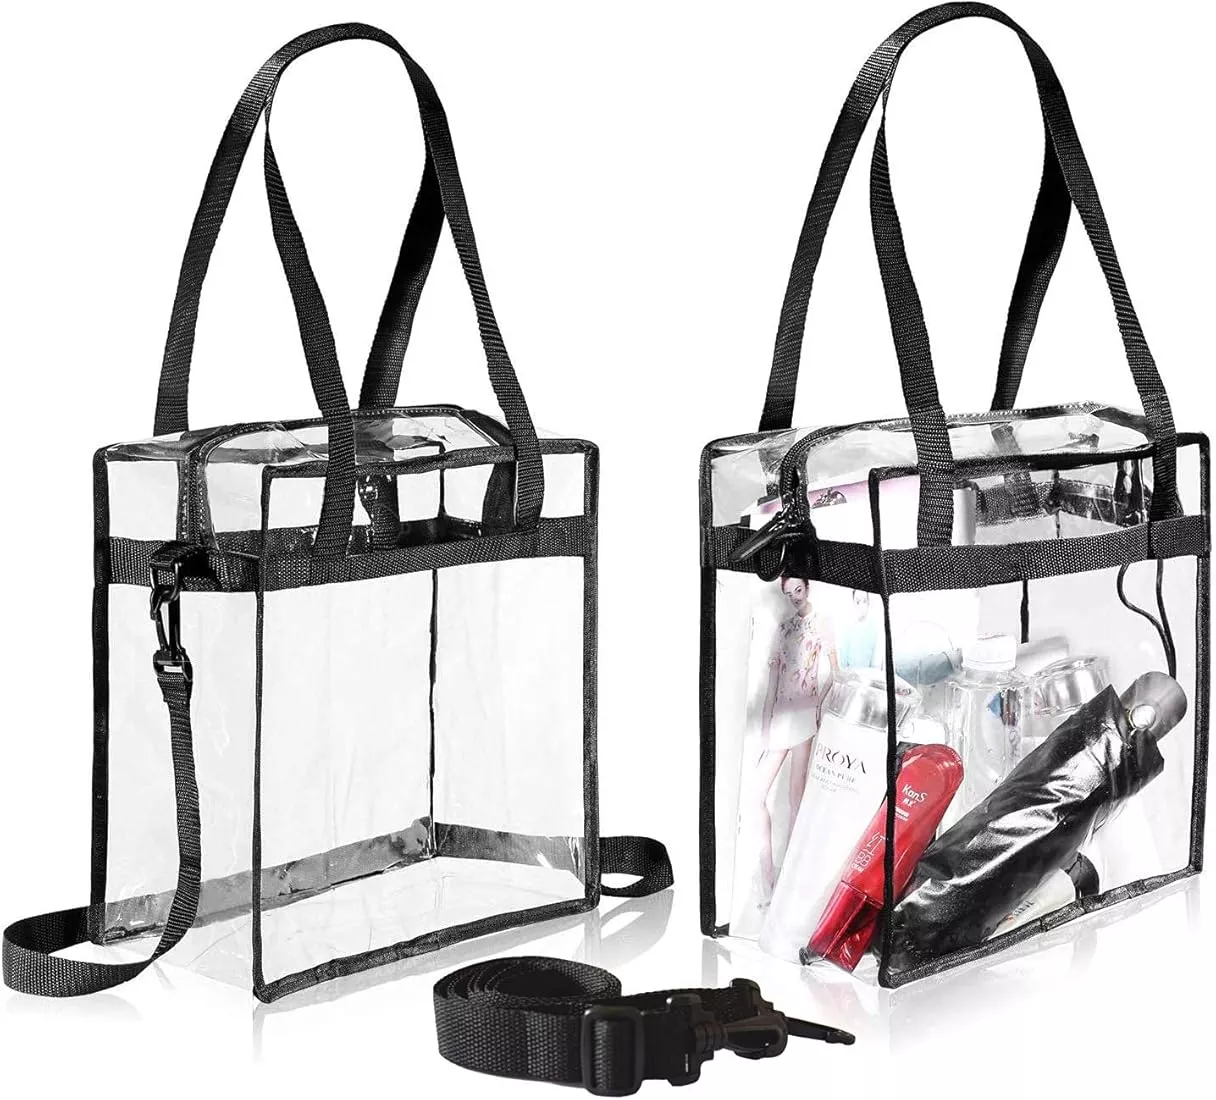  XSUIOY Clear Sling Bag Stadium Approved with